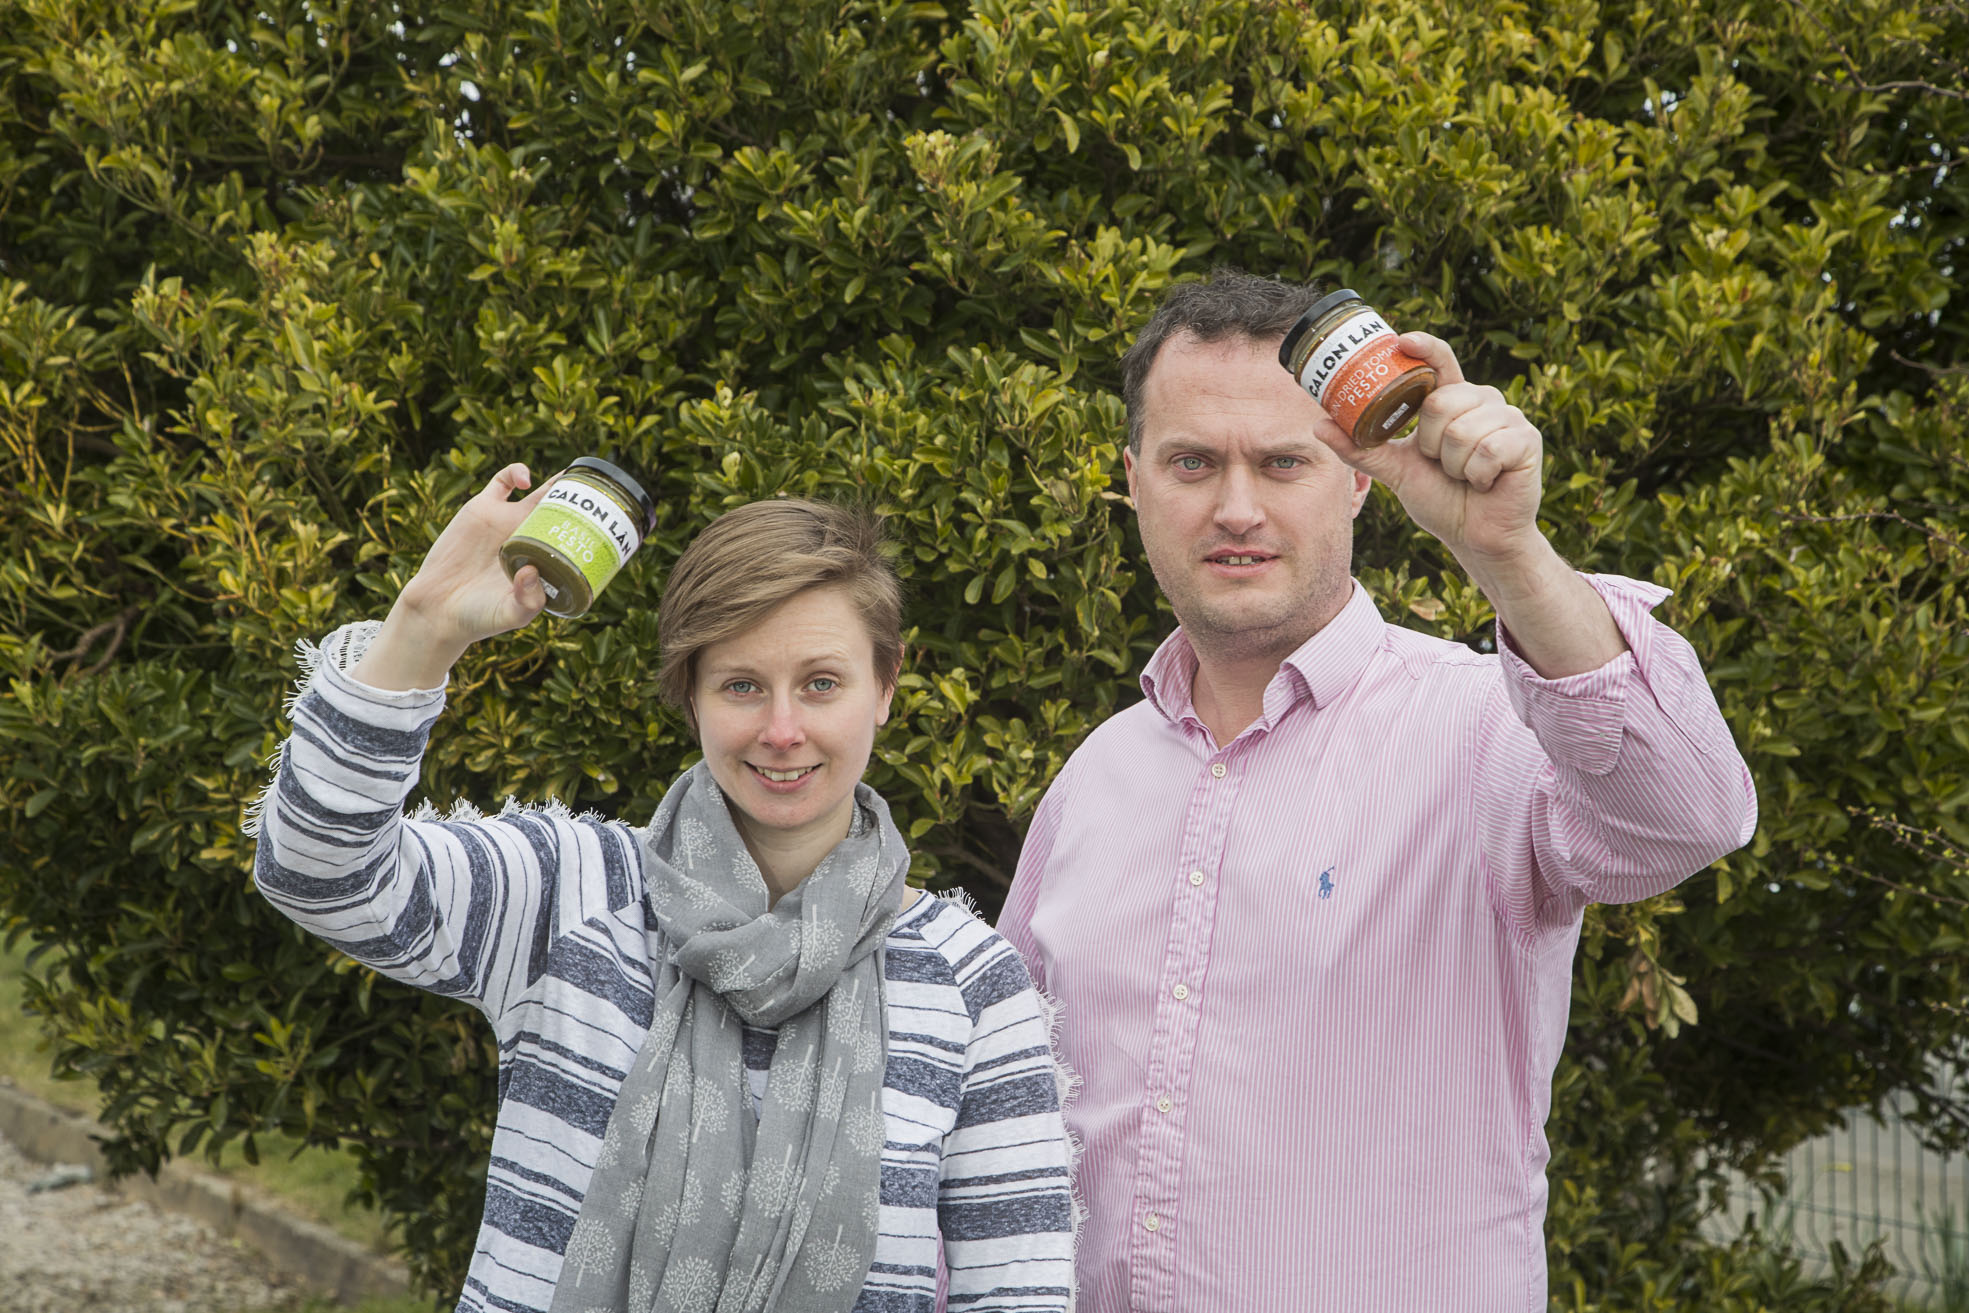 Food firms come together to create Wales’ first pesto sauces for home cooks